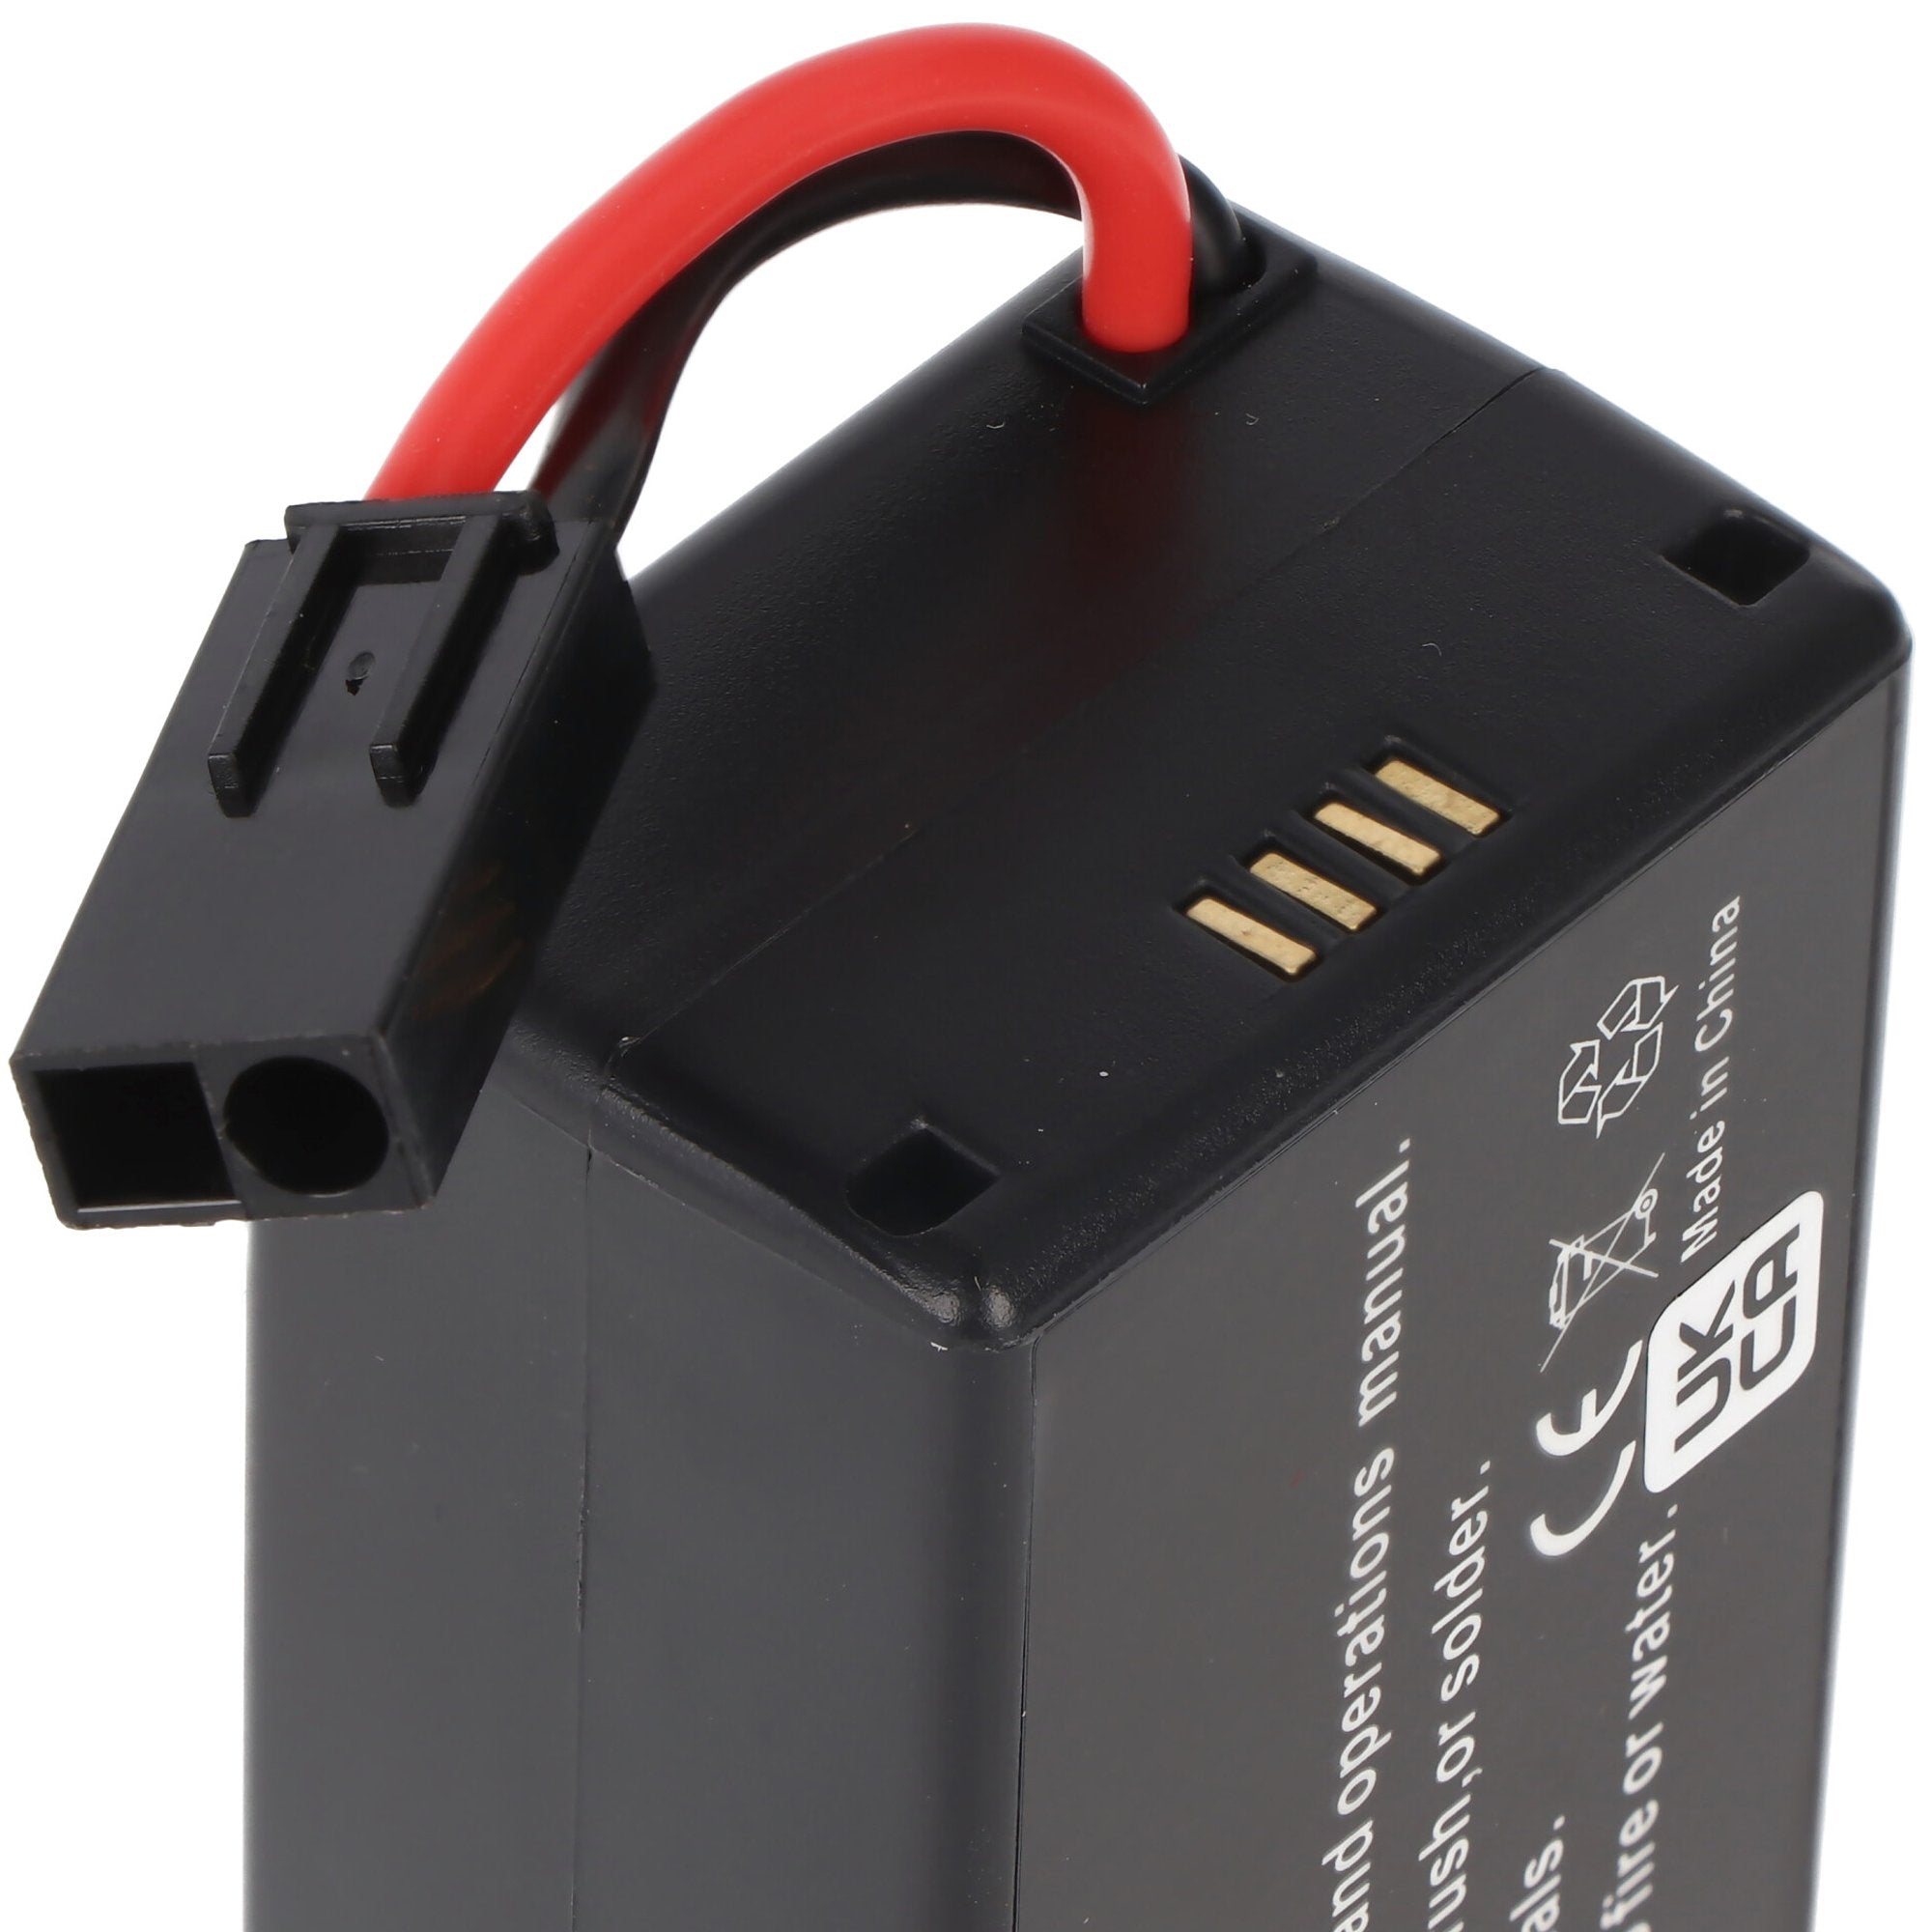 Battery for Parrot AR.Drone 2.0 and others 1500mAh